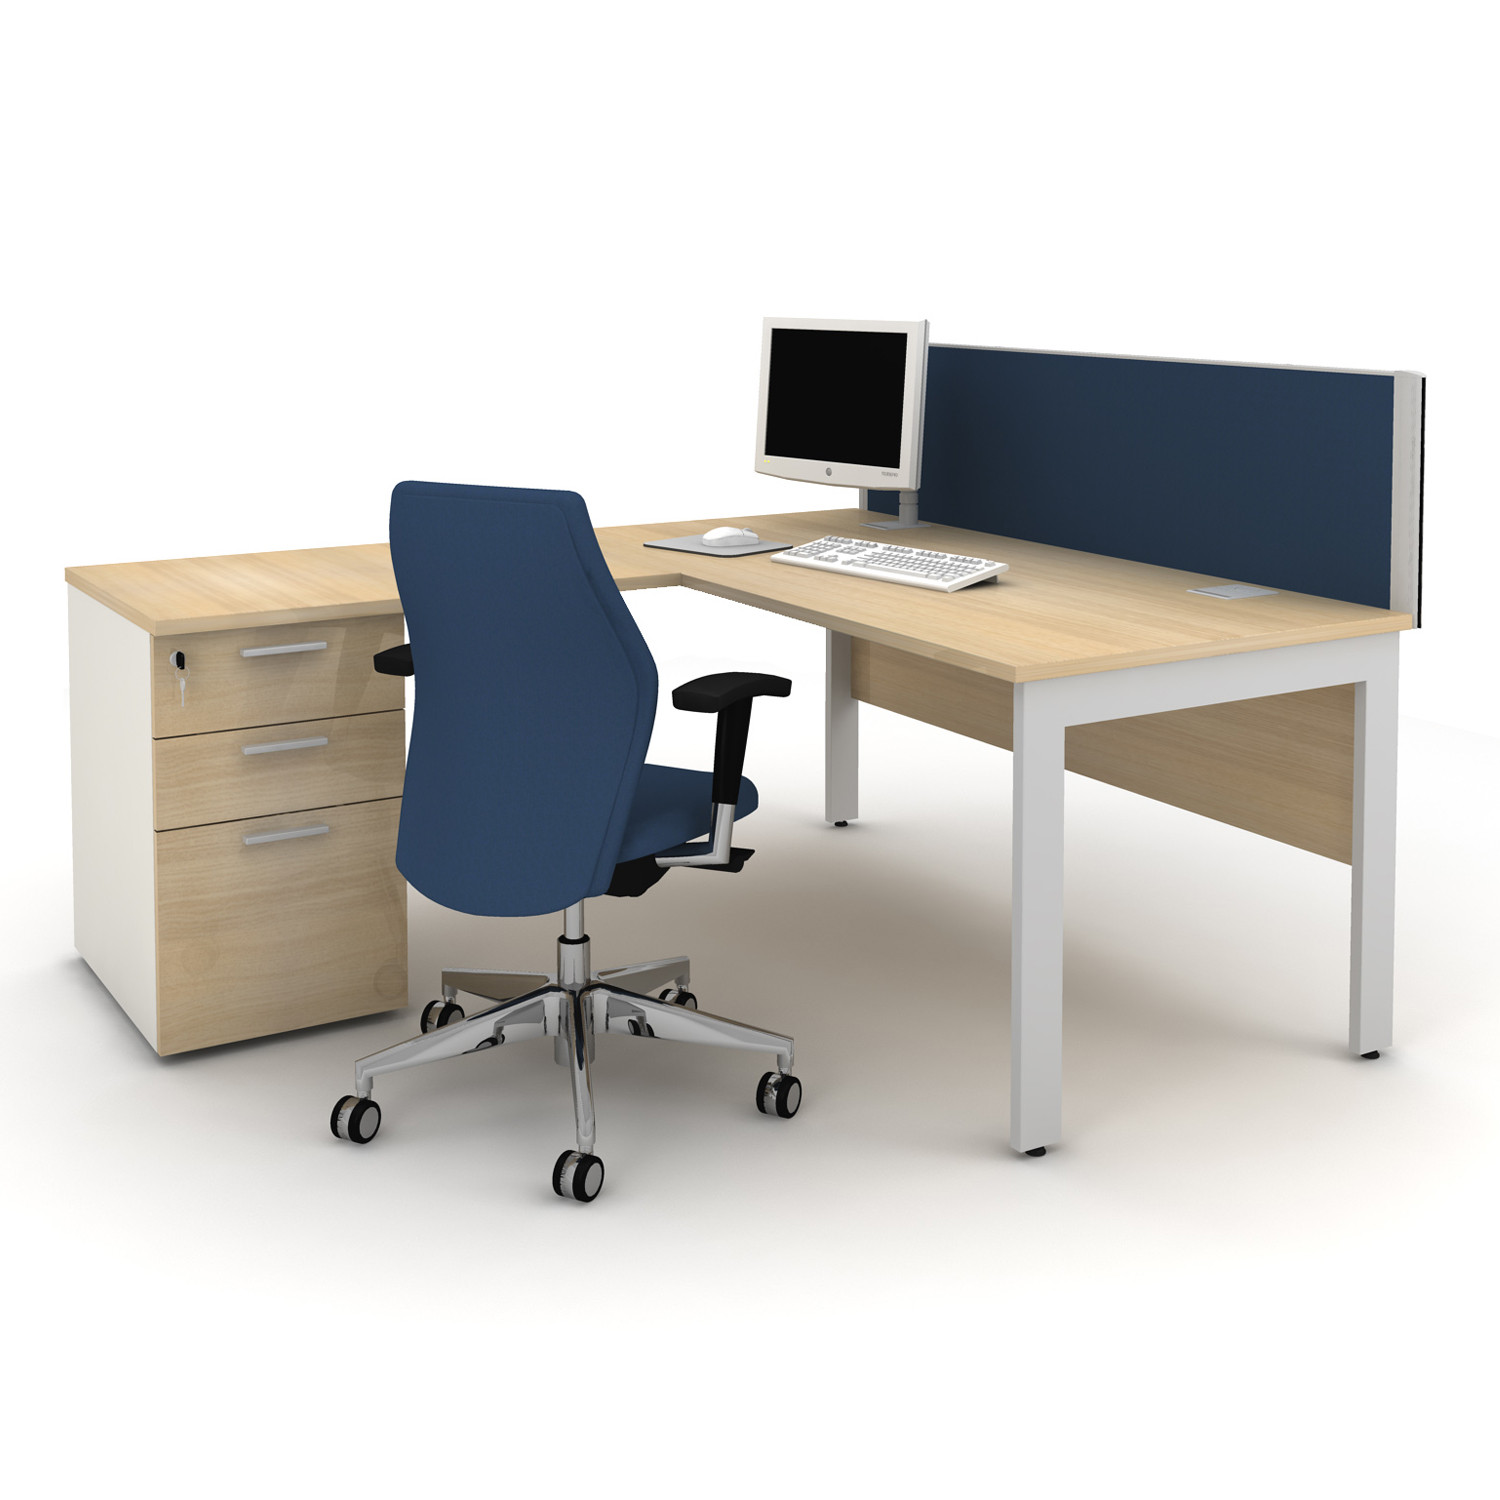 office furniture clipart - photo #46